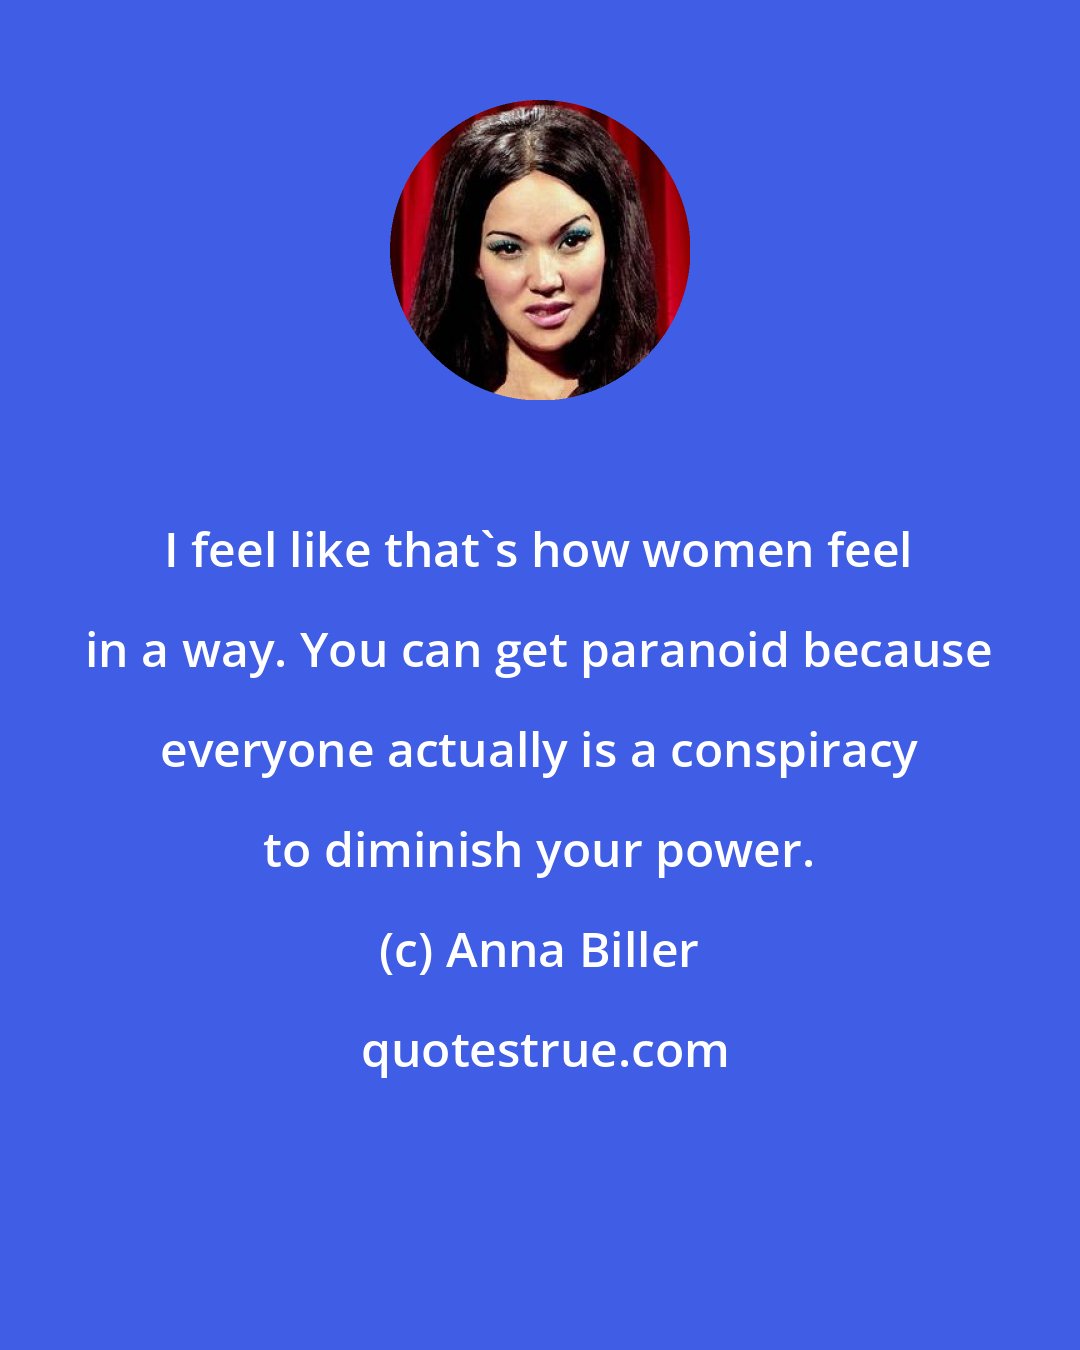 Anna Biller: I feel like that's how women feel in a way. You can get paranoid because everyone actually is a conspiracy to diminish your power.